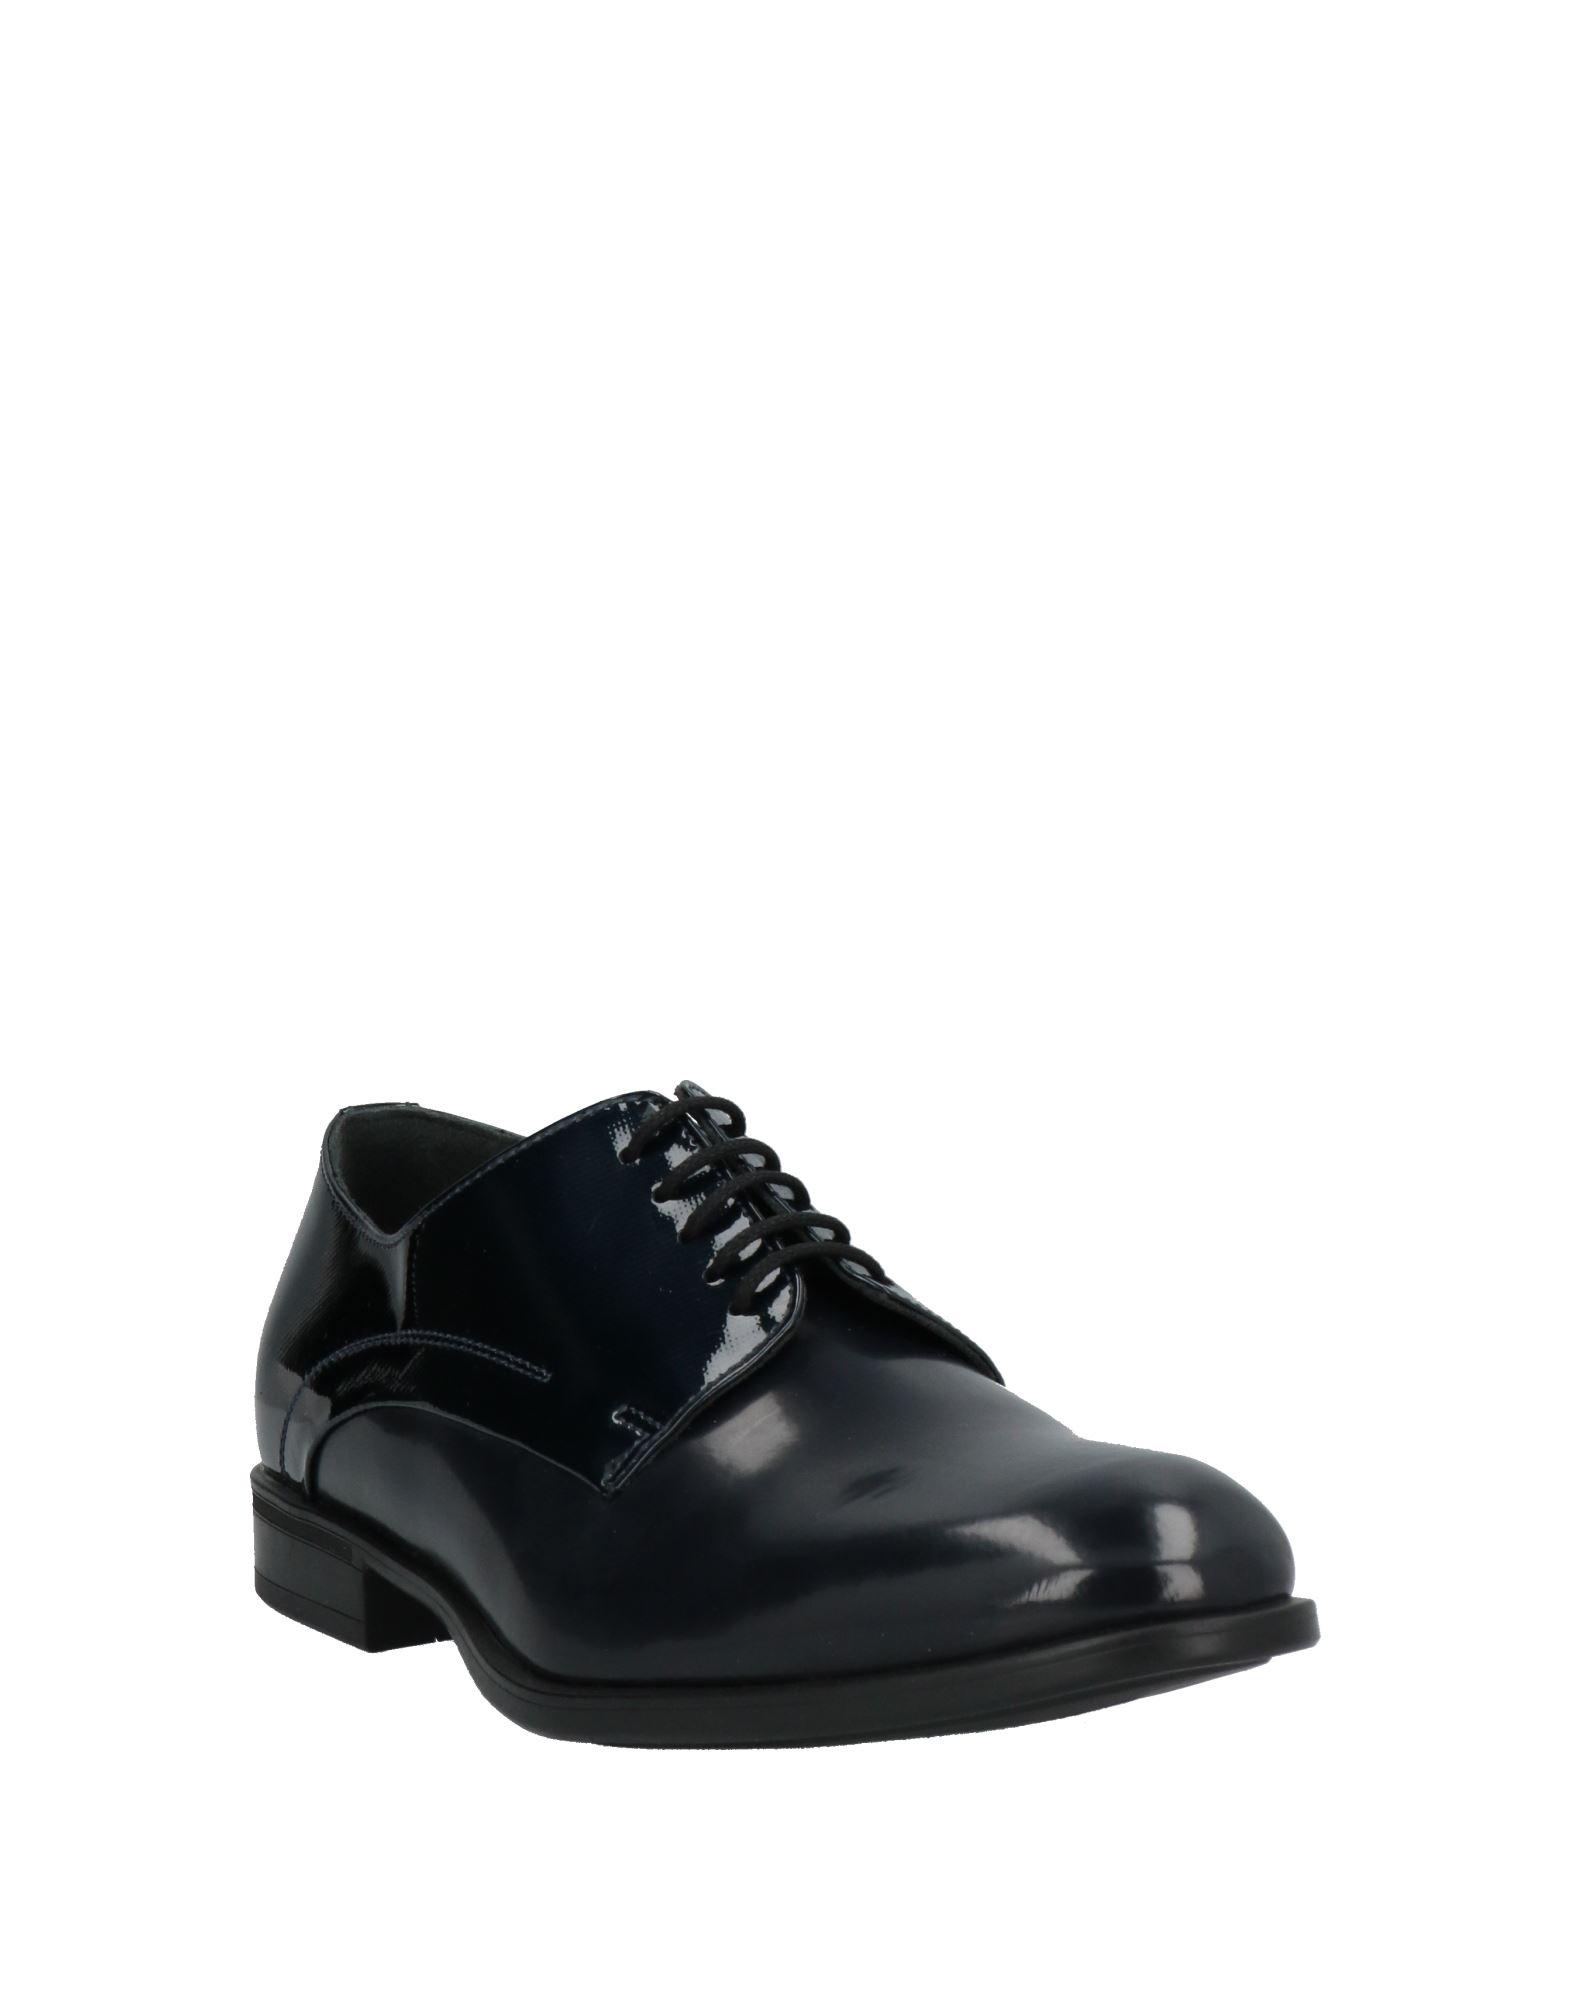 EVENTO by CARLO PIGNATELLI Lace-up Shoes in Black for Men | Lyst